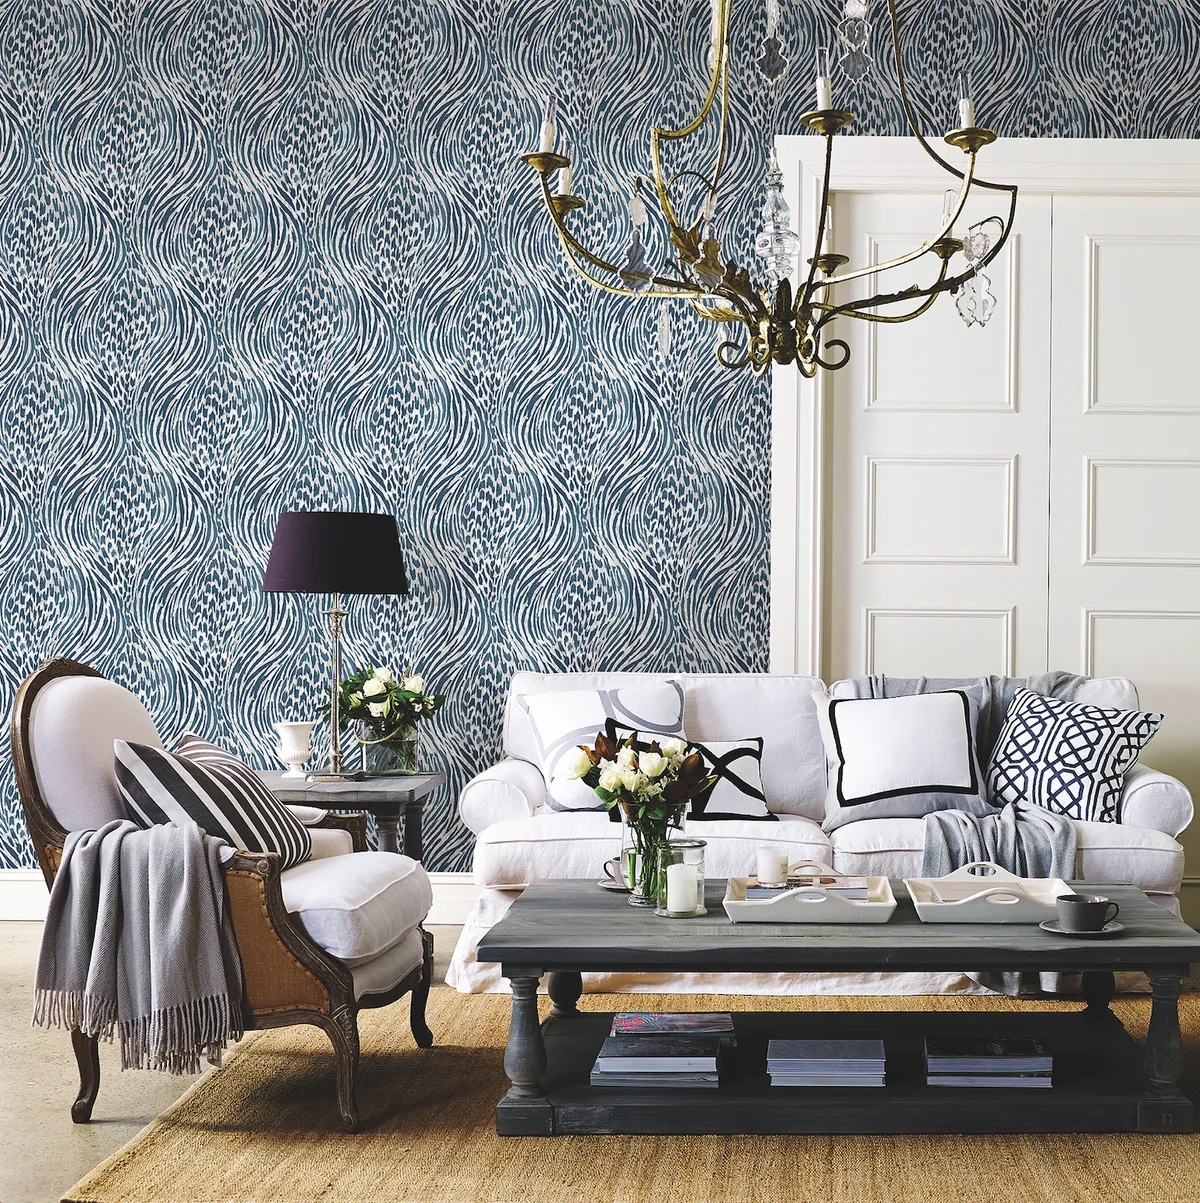 How to mix and match pattern in your home